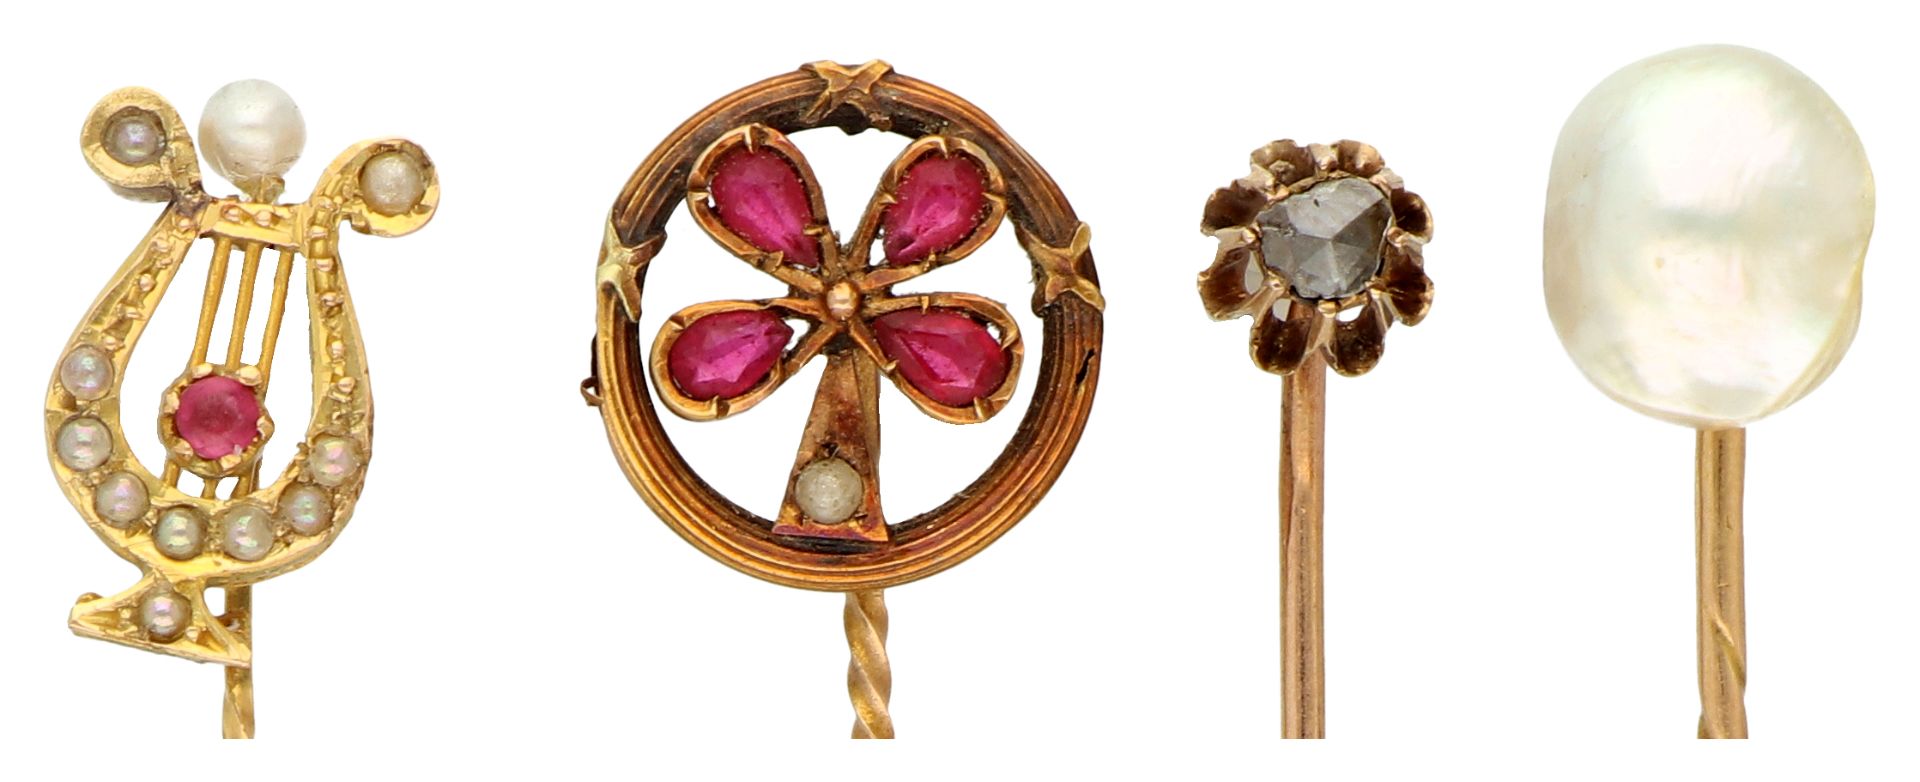 No Reserve - Lot of four antique 14K yellow gold lapel pins set with various gemstones and a baroque - Image 2 of 3